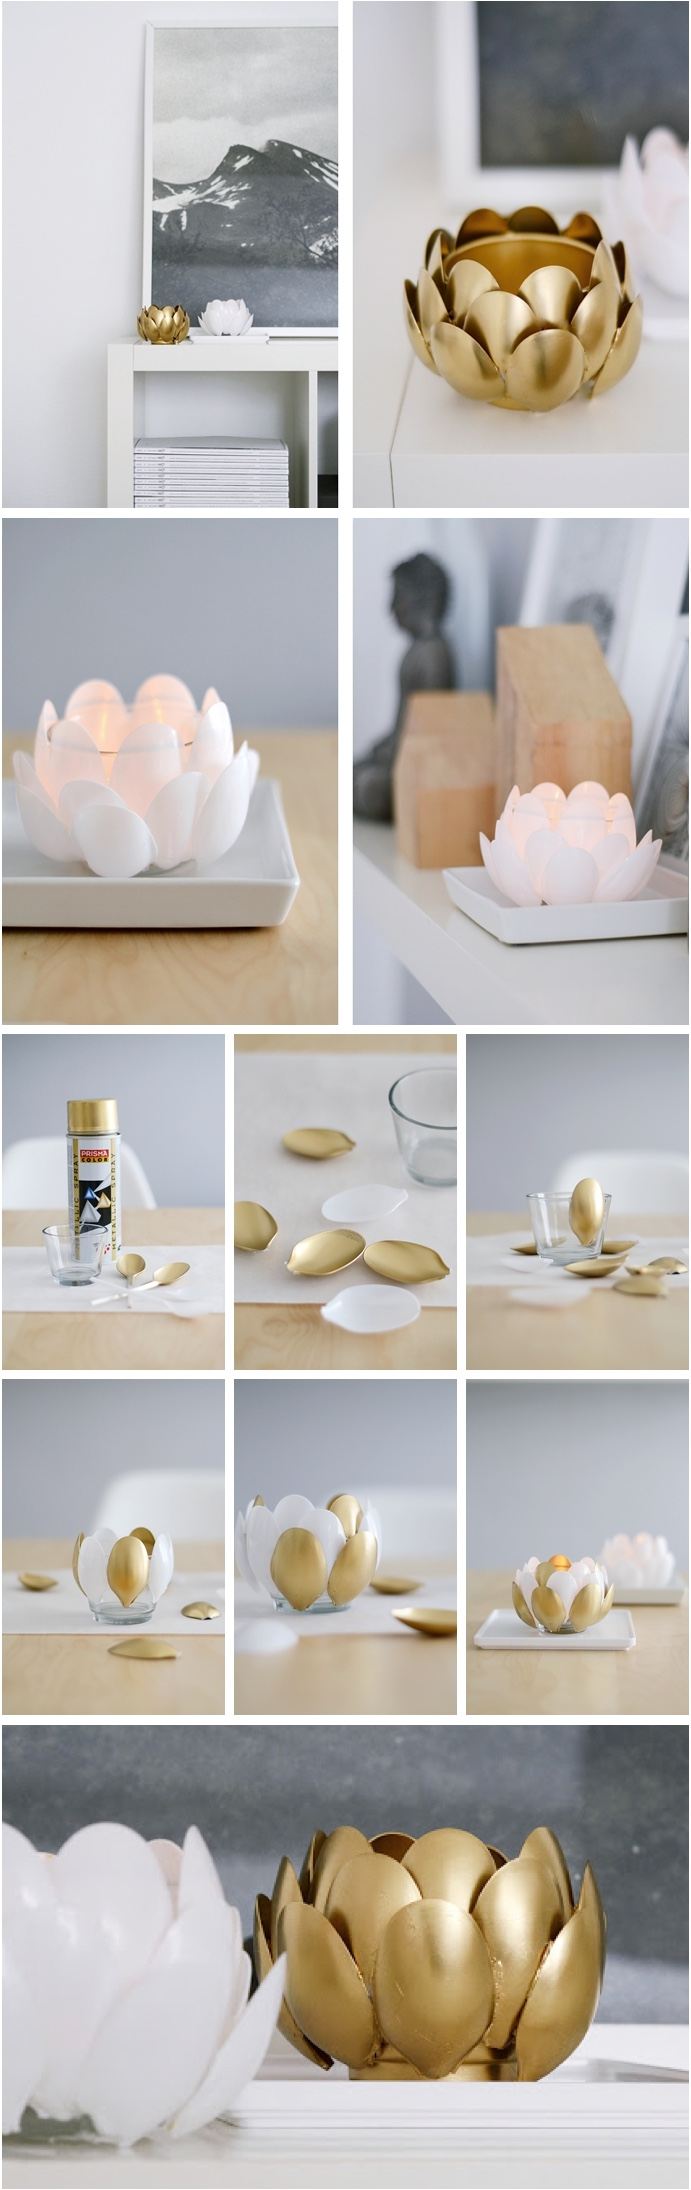 DIY Water Lilies - plastic spoon candle holder